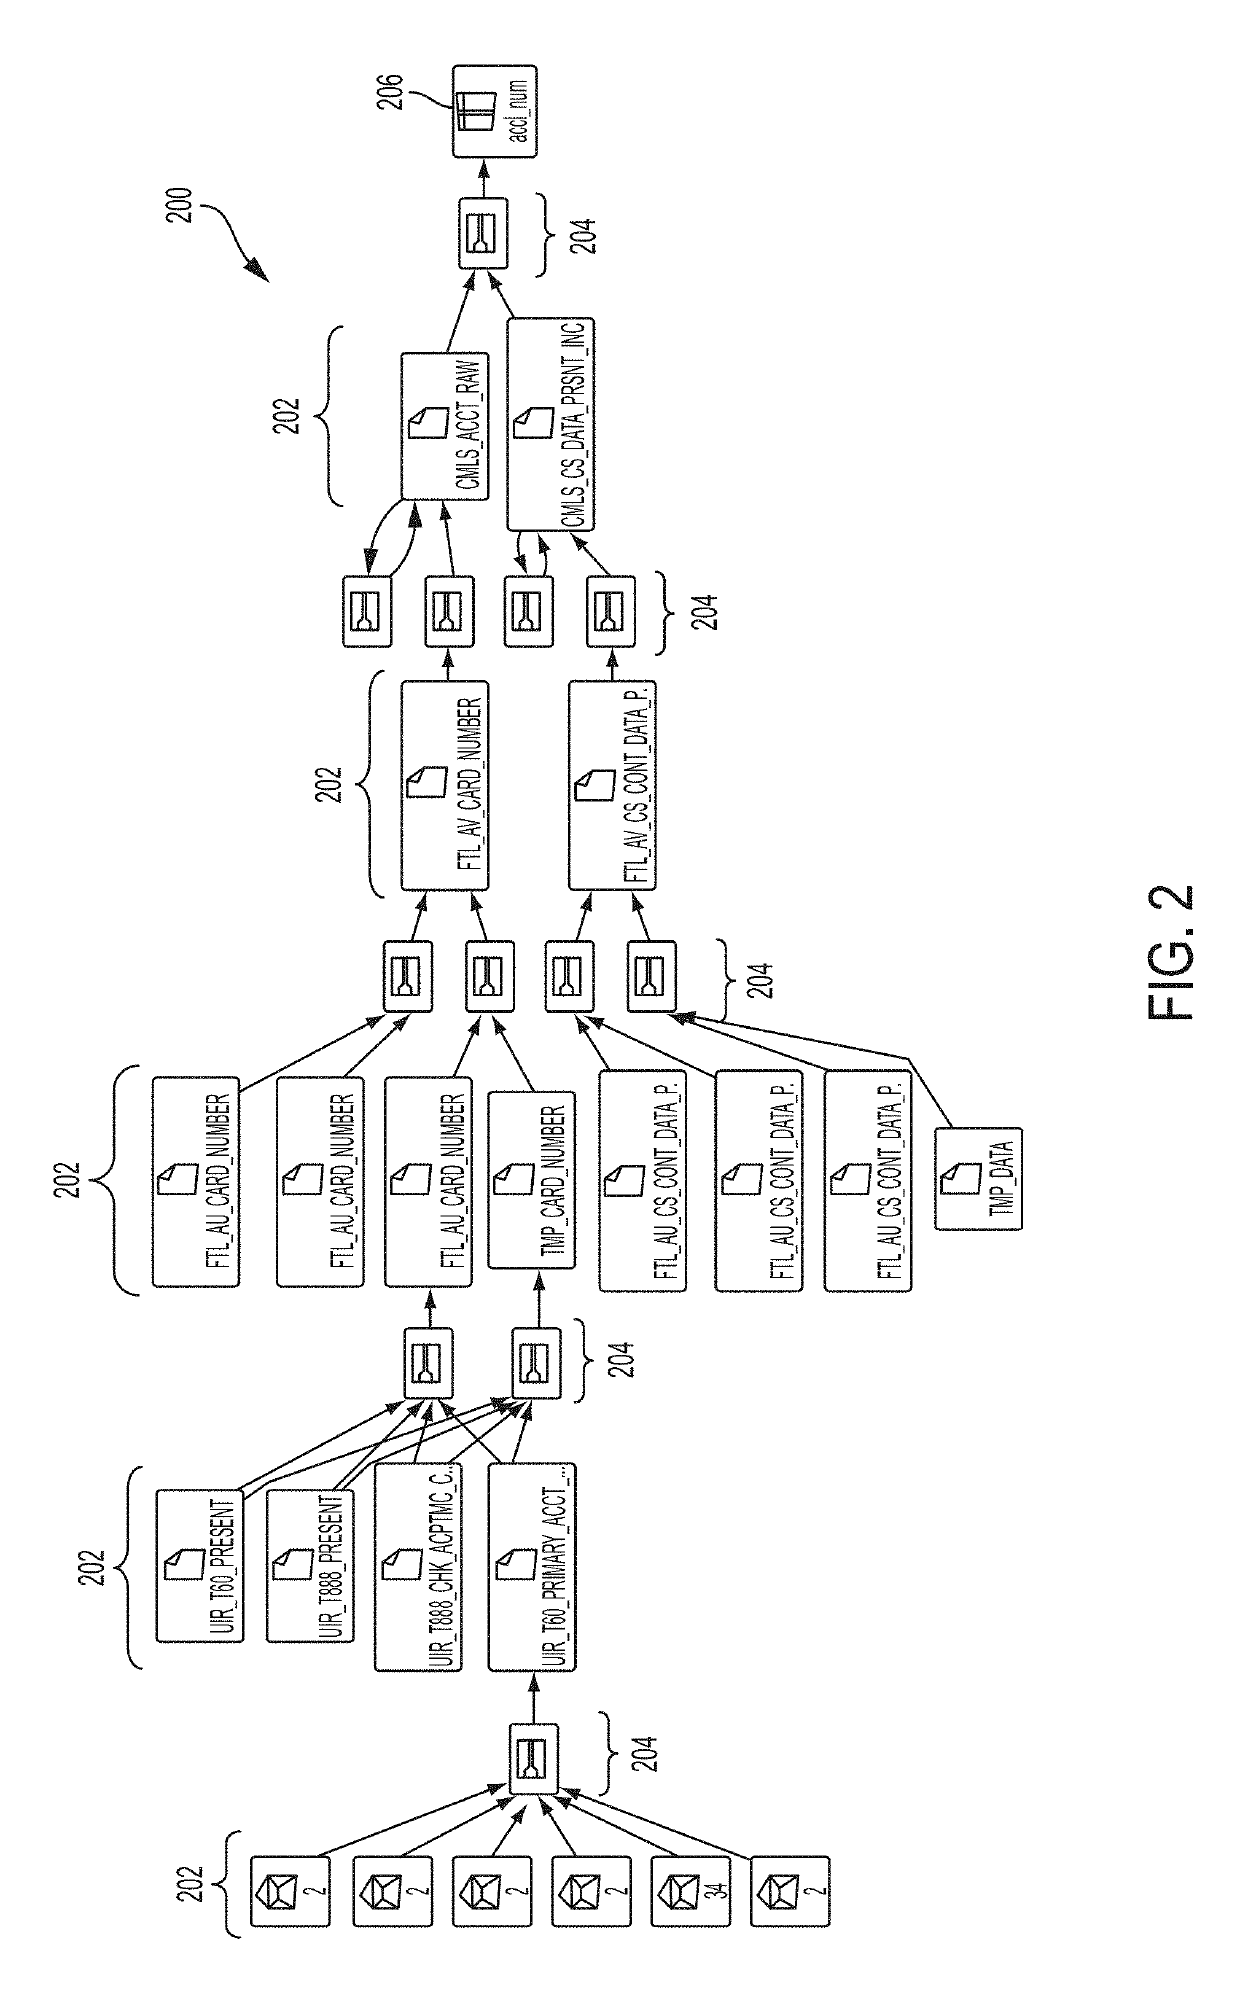 Systems and methods for determining relationships among data elements